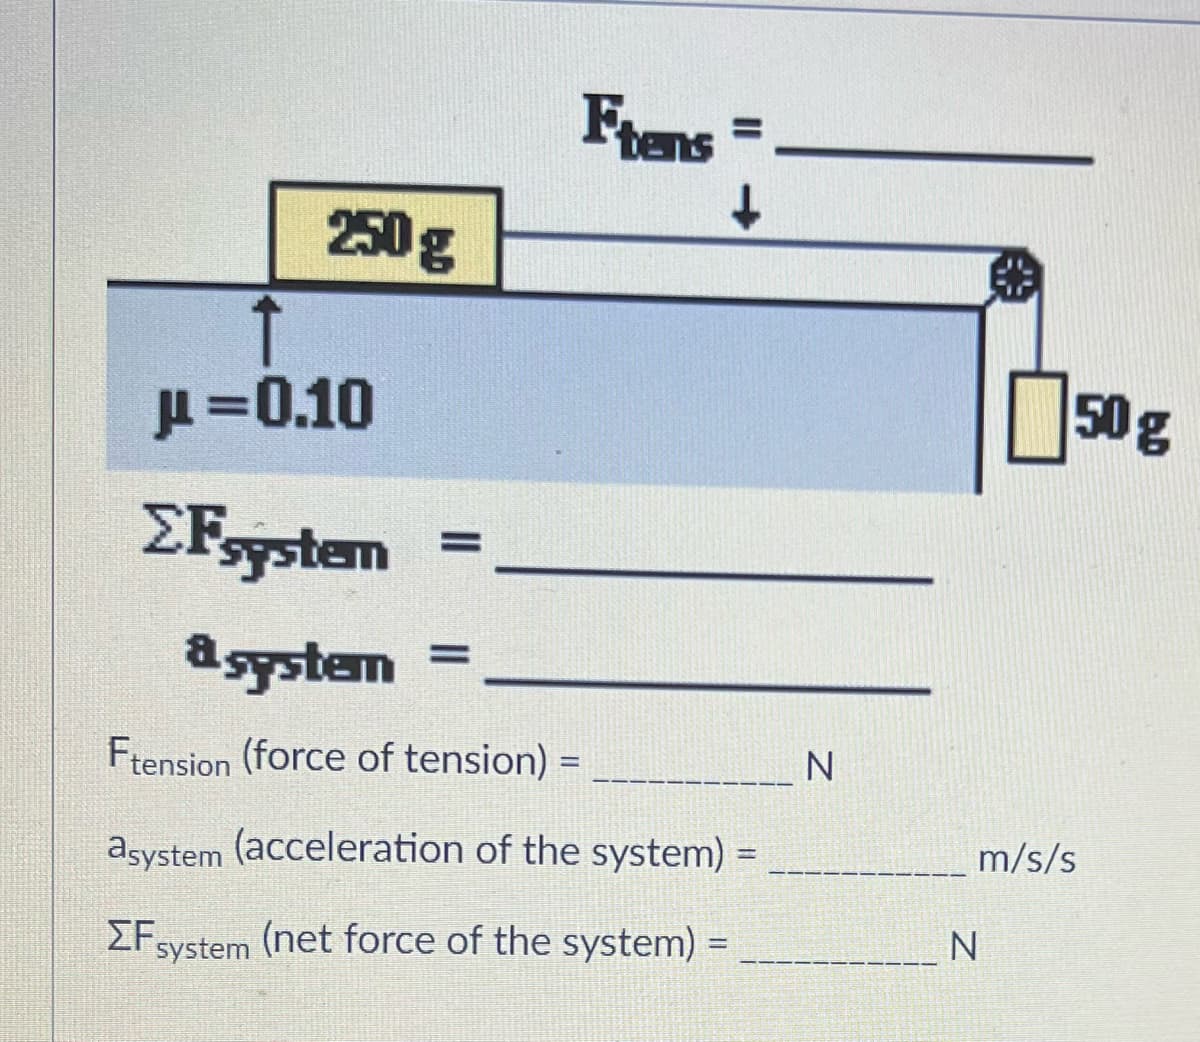 250 g
Ftens
↓
↑
μ = 0.10
ΣFsystem
=
a system
Ftension (force of tension) =
asystem (acceleration of the system) =
ΣΕ.
system (net force of the system) =
N
m/s/s
N
50 g